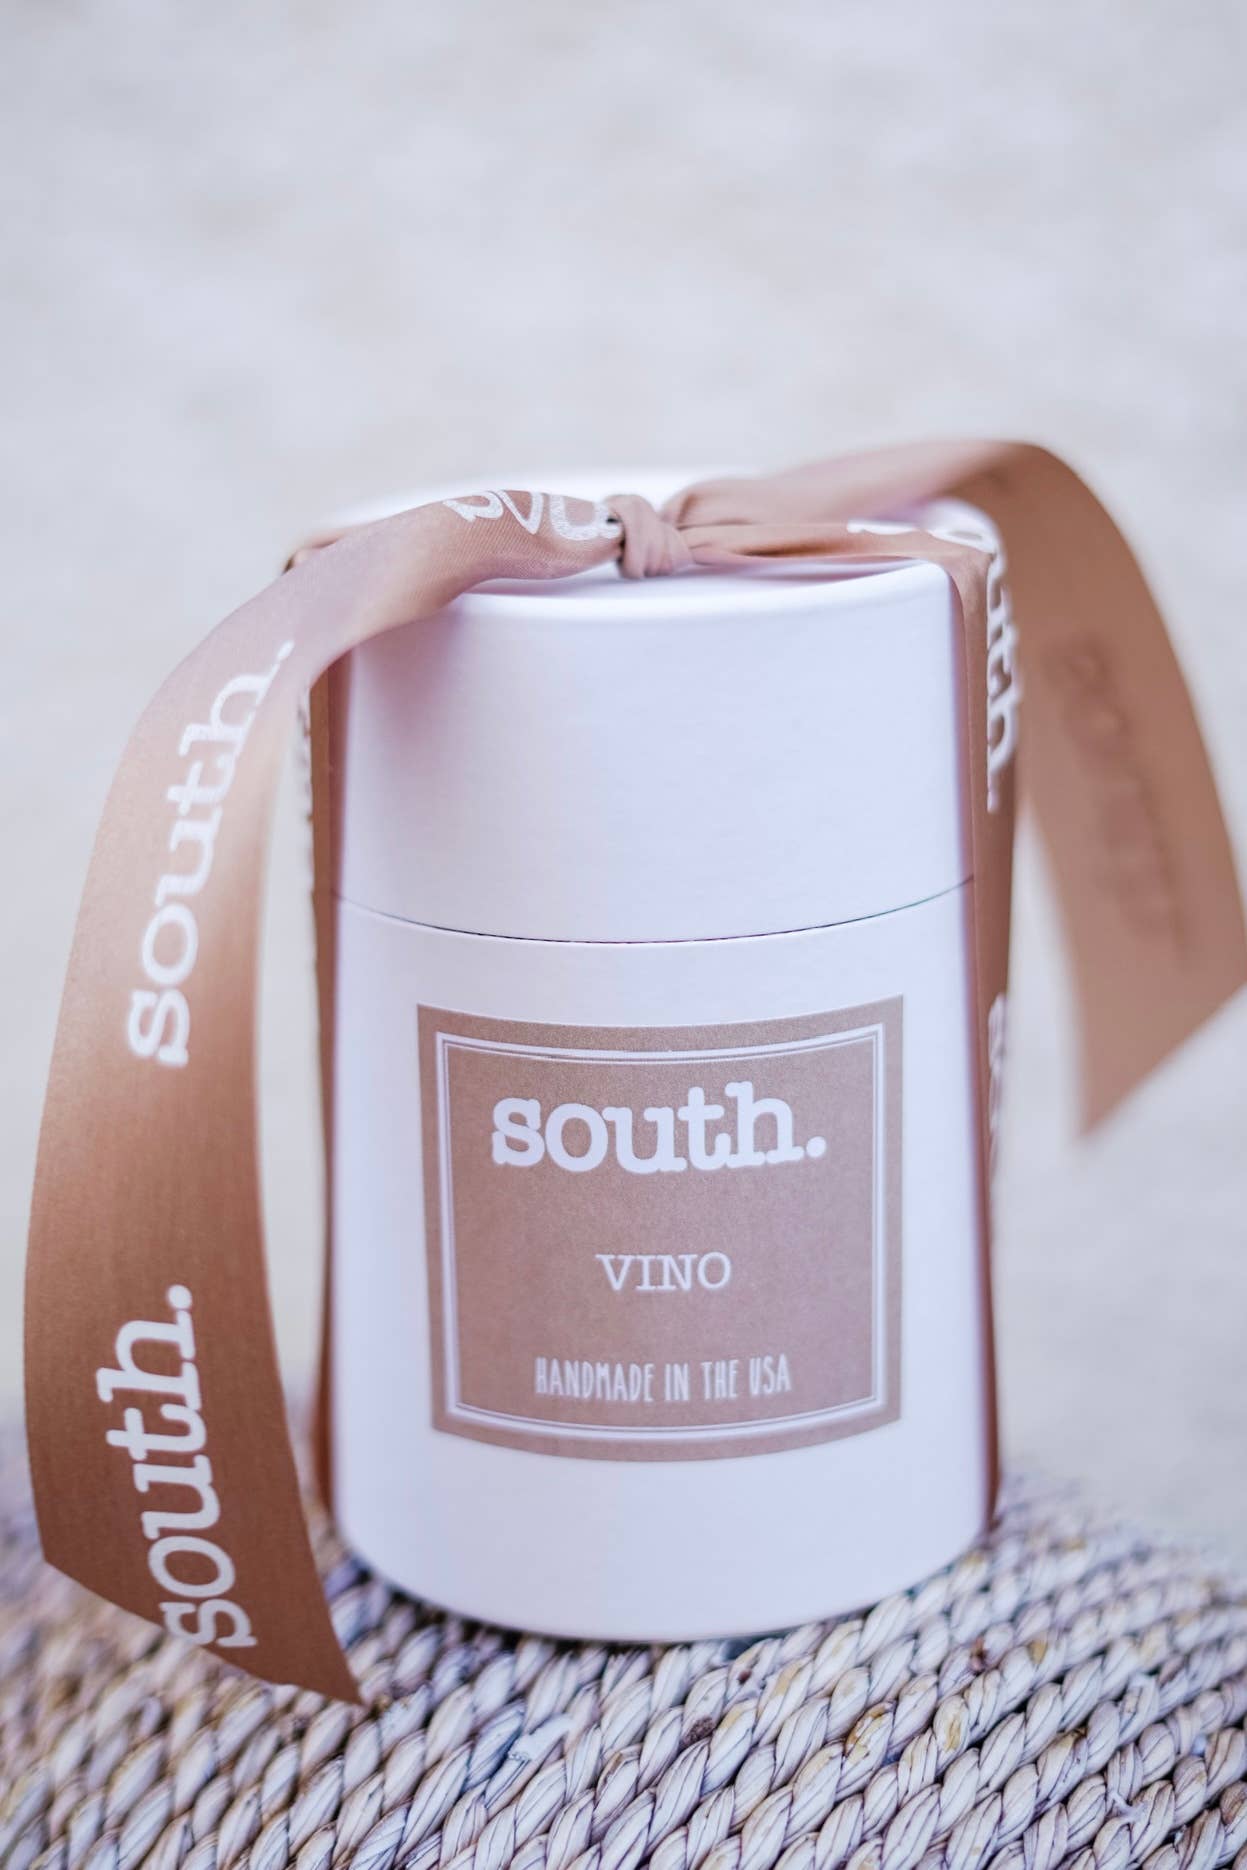 The South Candle - Vino